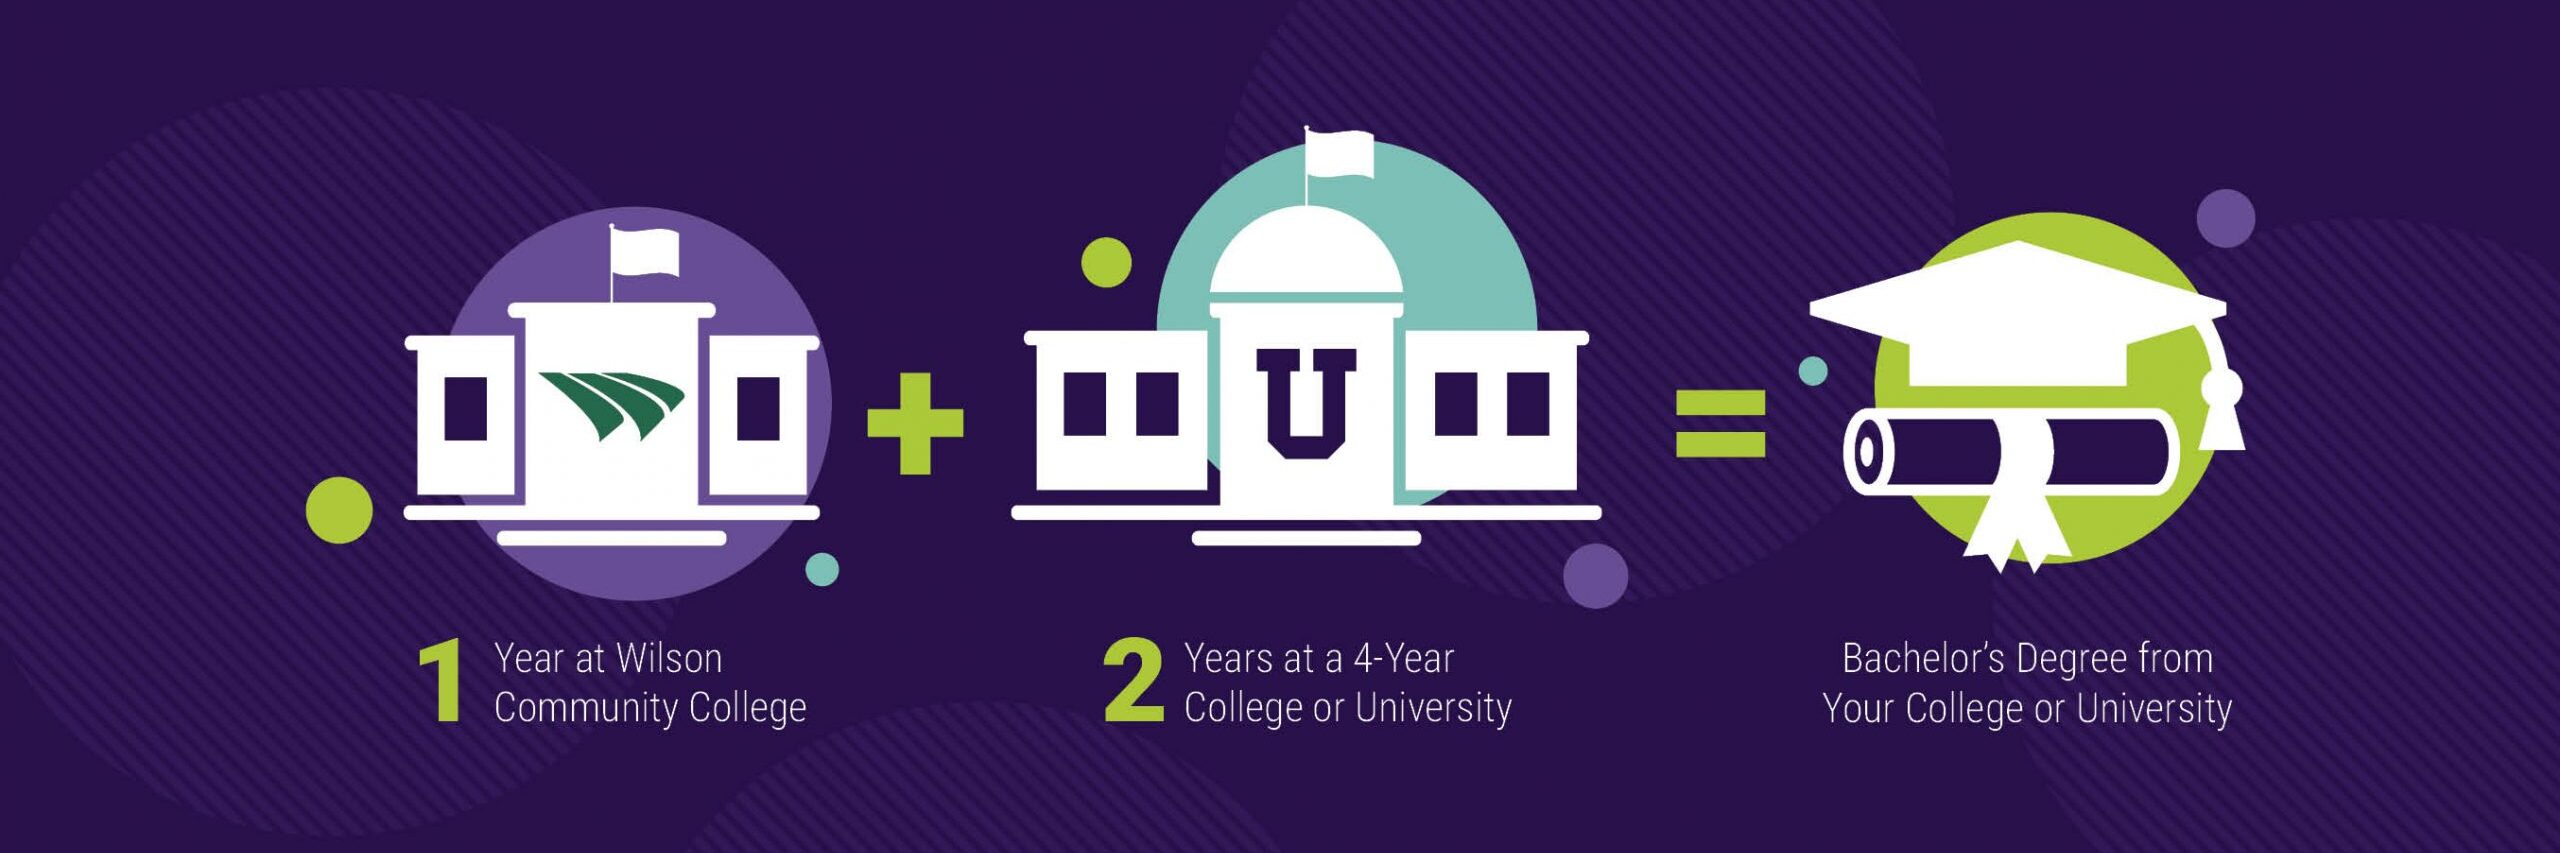 College Building Icon: 1 Year at Wilson Community College + University Building Icon: 2 Years at a 4-Year College or University = Graduation Cap and Diploma Icon: Bachelor's Degree from Your College or University